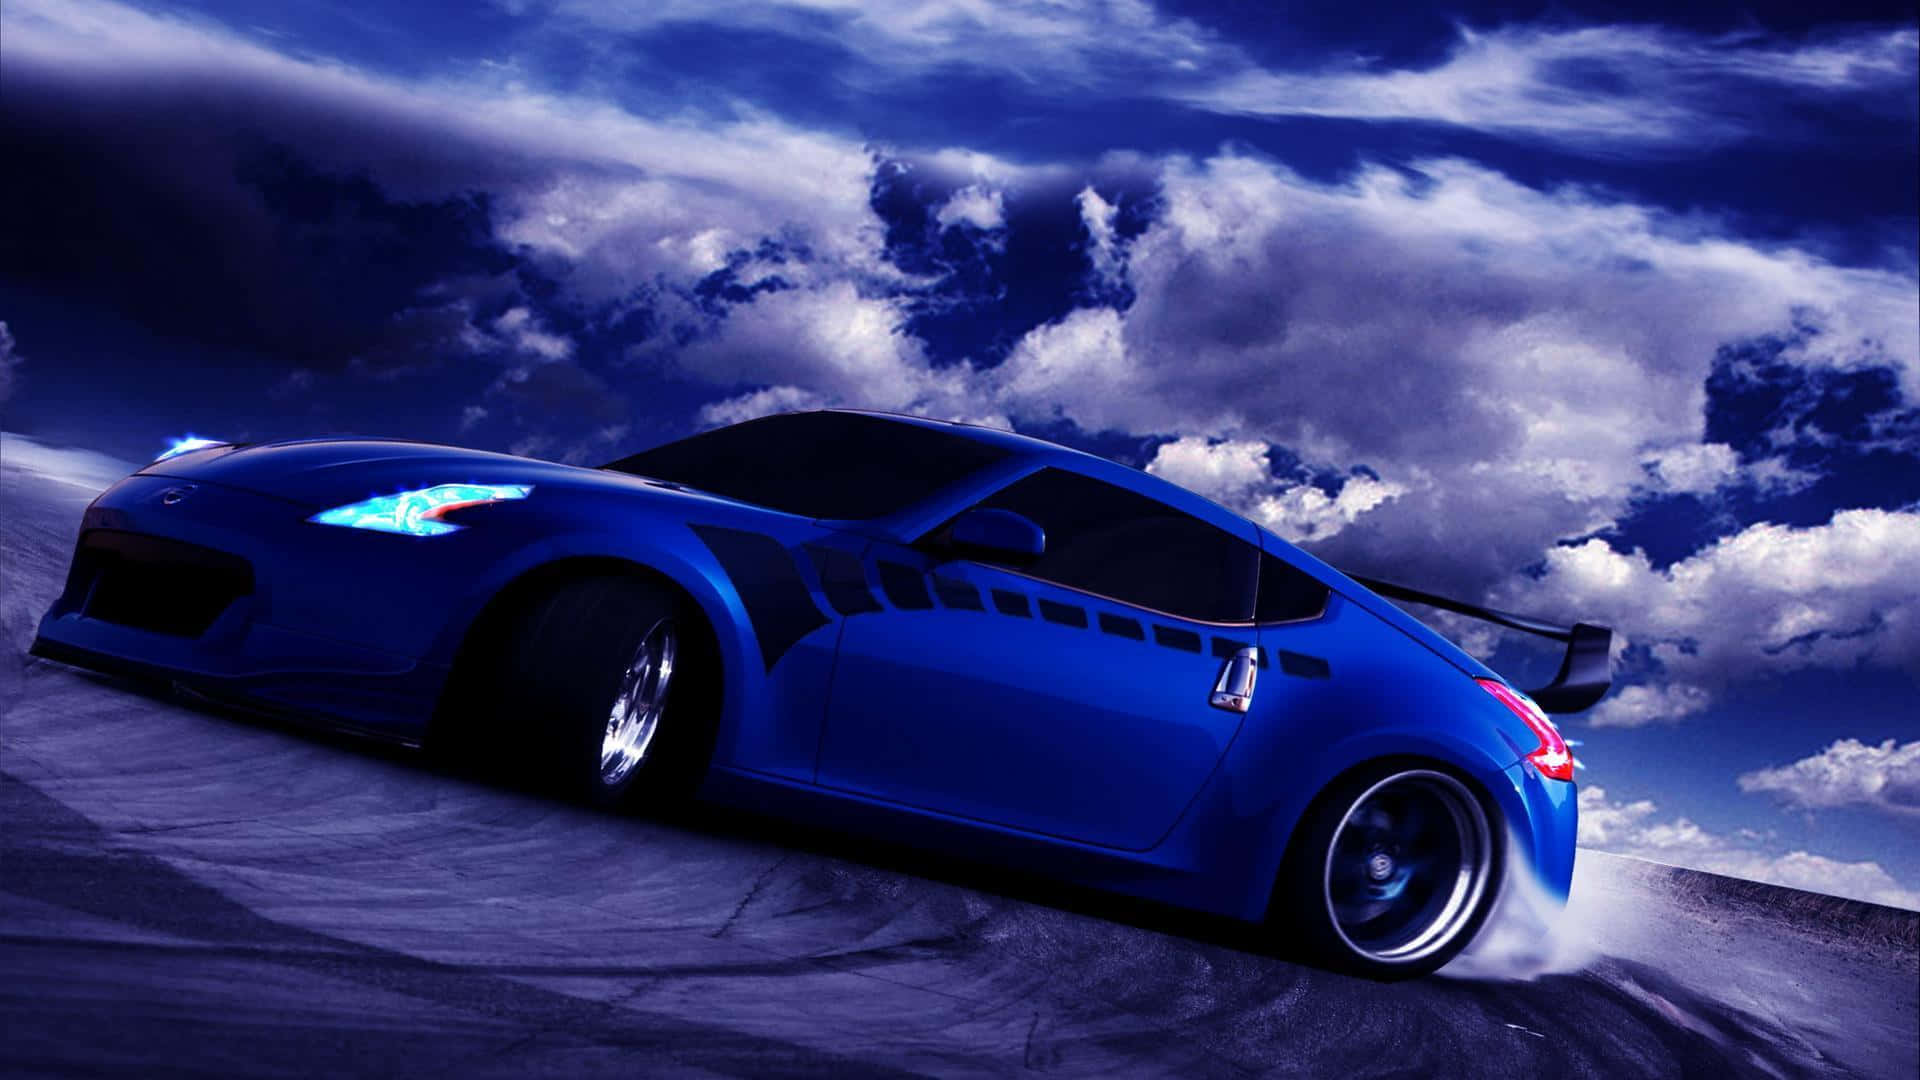 A Blue Sports Car Driving Down A Road With Clouds In The Background Wallpaper